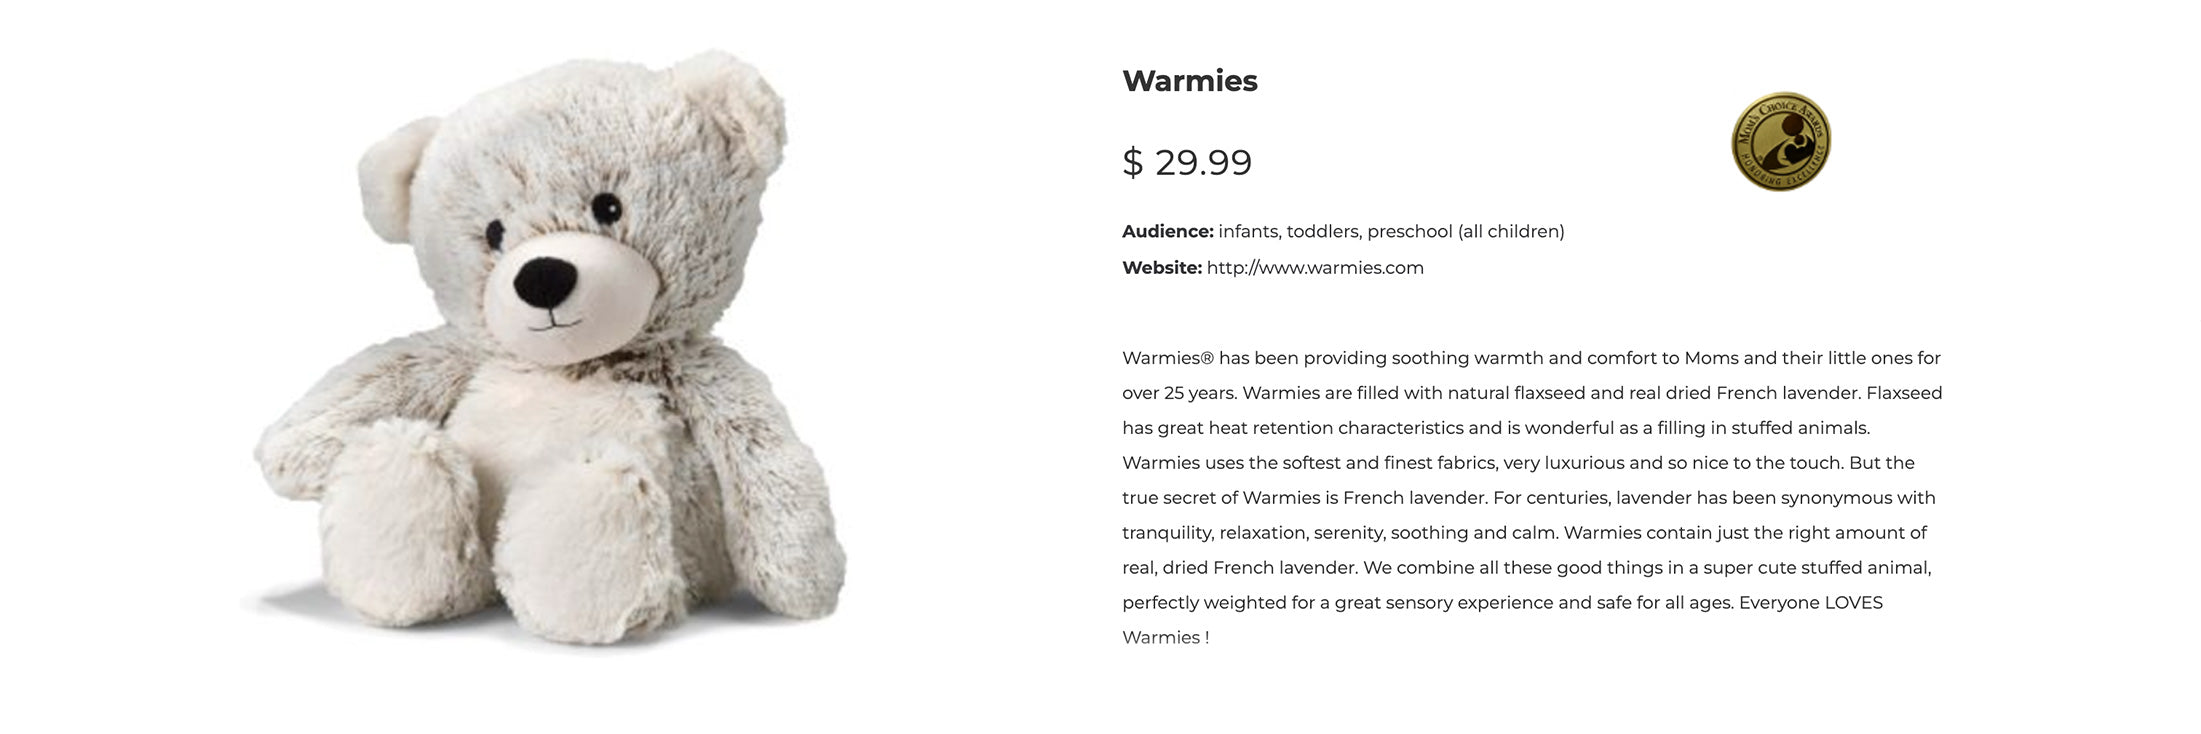 Warmies Lavender Scented, Soothing, and Comforting Plush